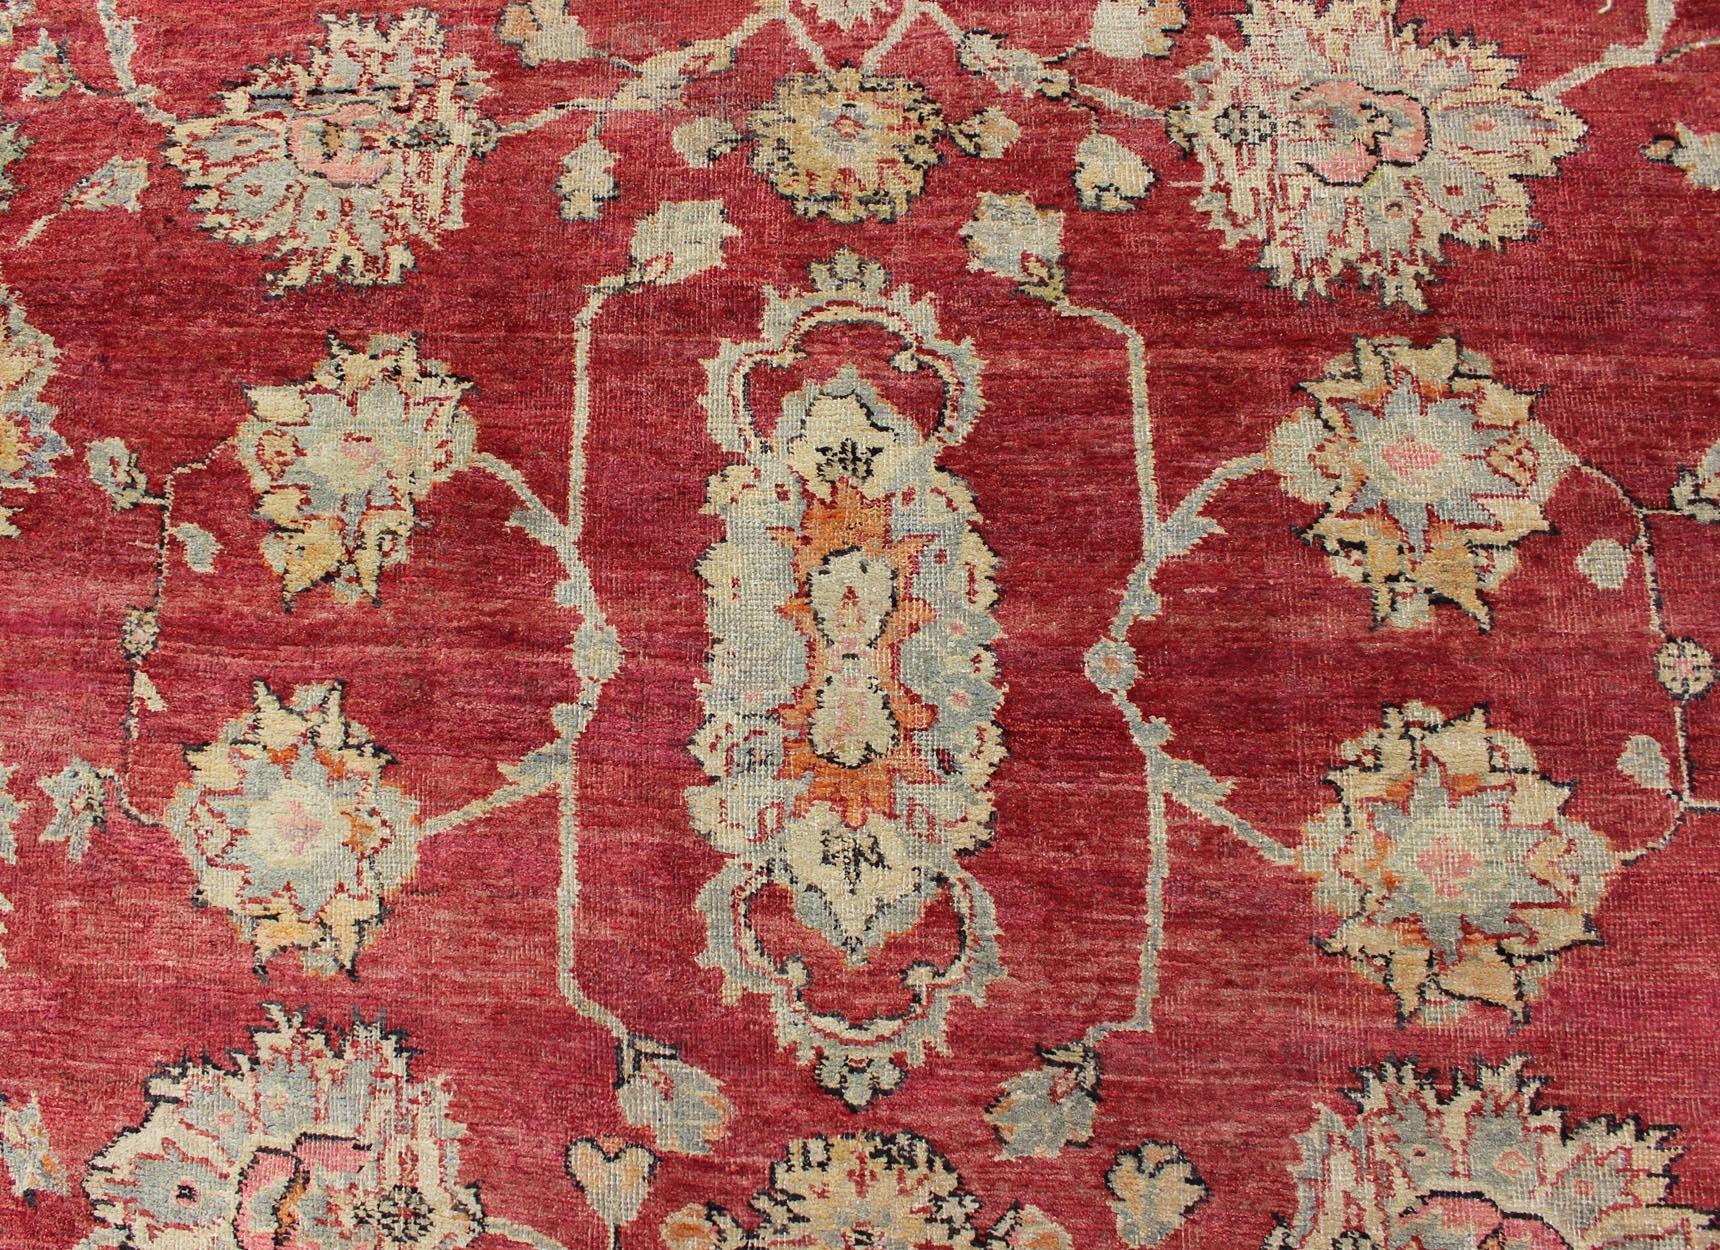 Antique Turkish Oushak Rug in Red, Blue/Gray Border, L. Green, Yellow & Pink For Sale 1